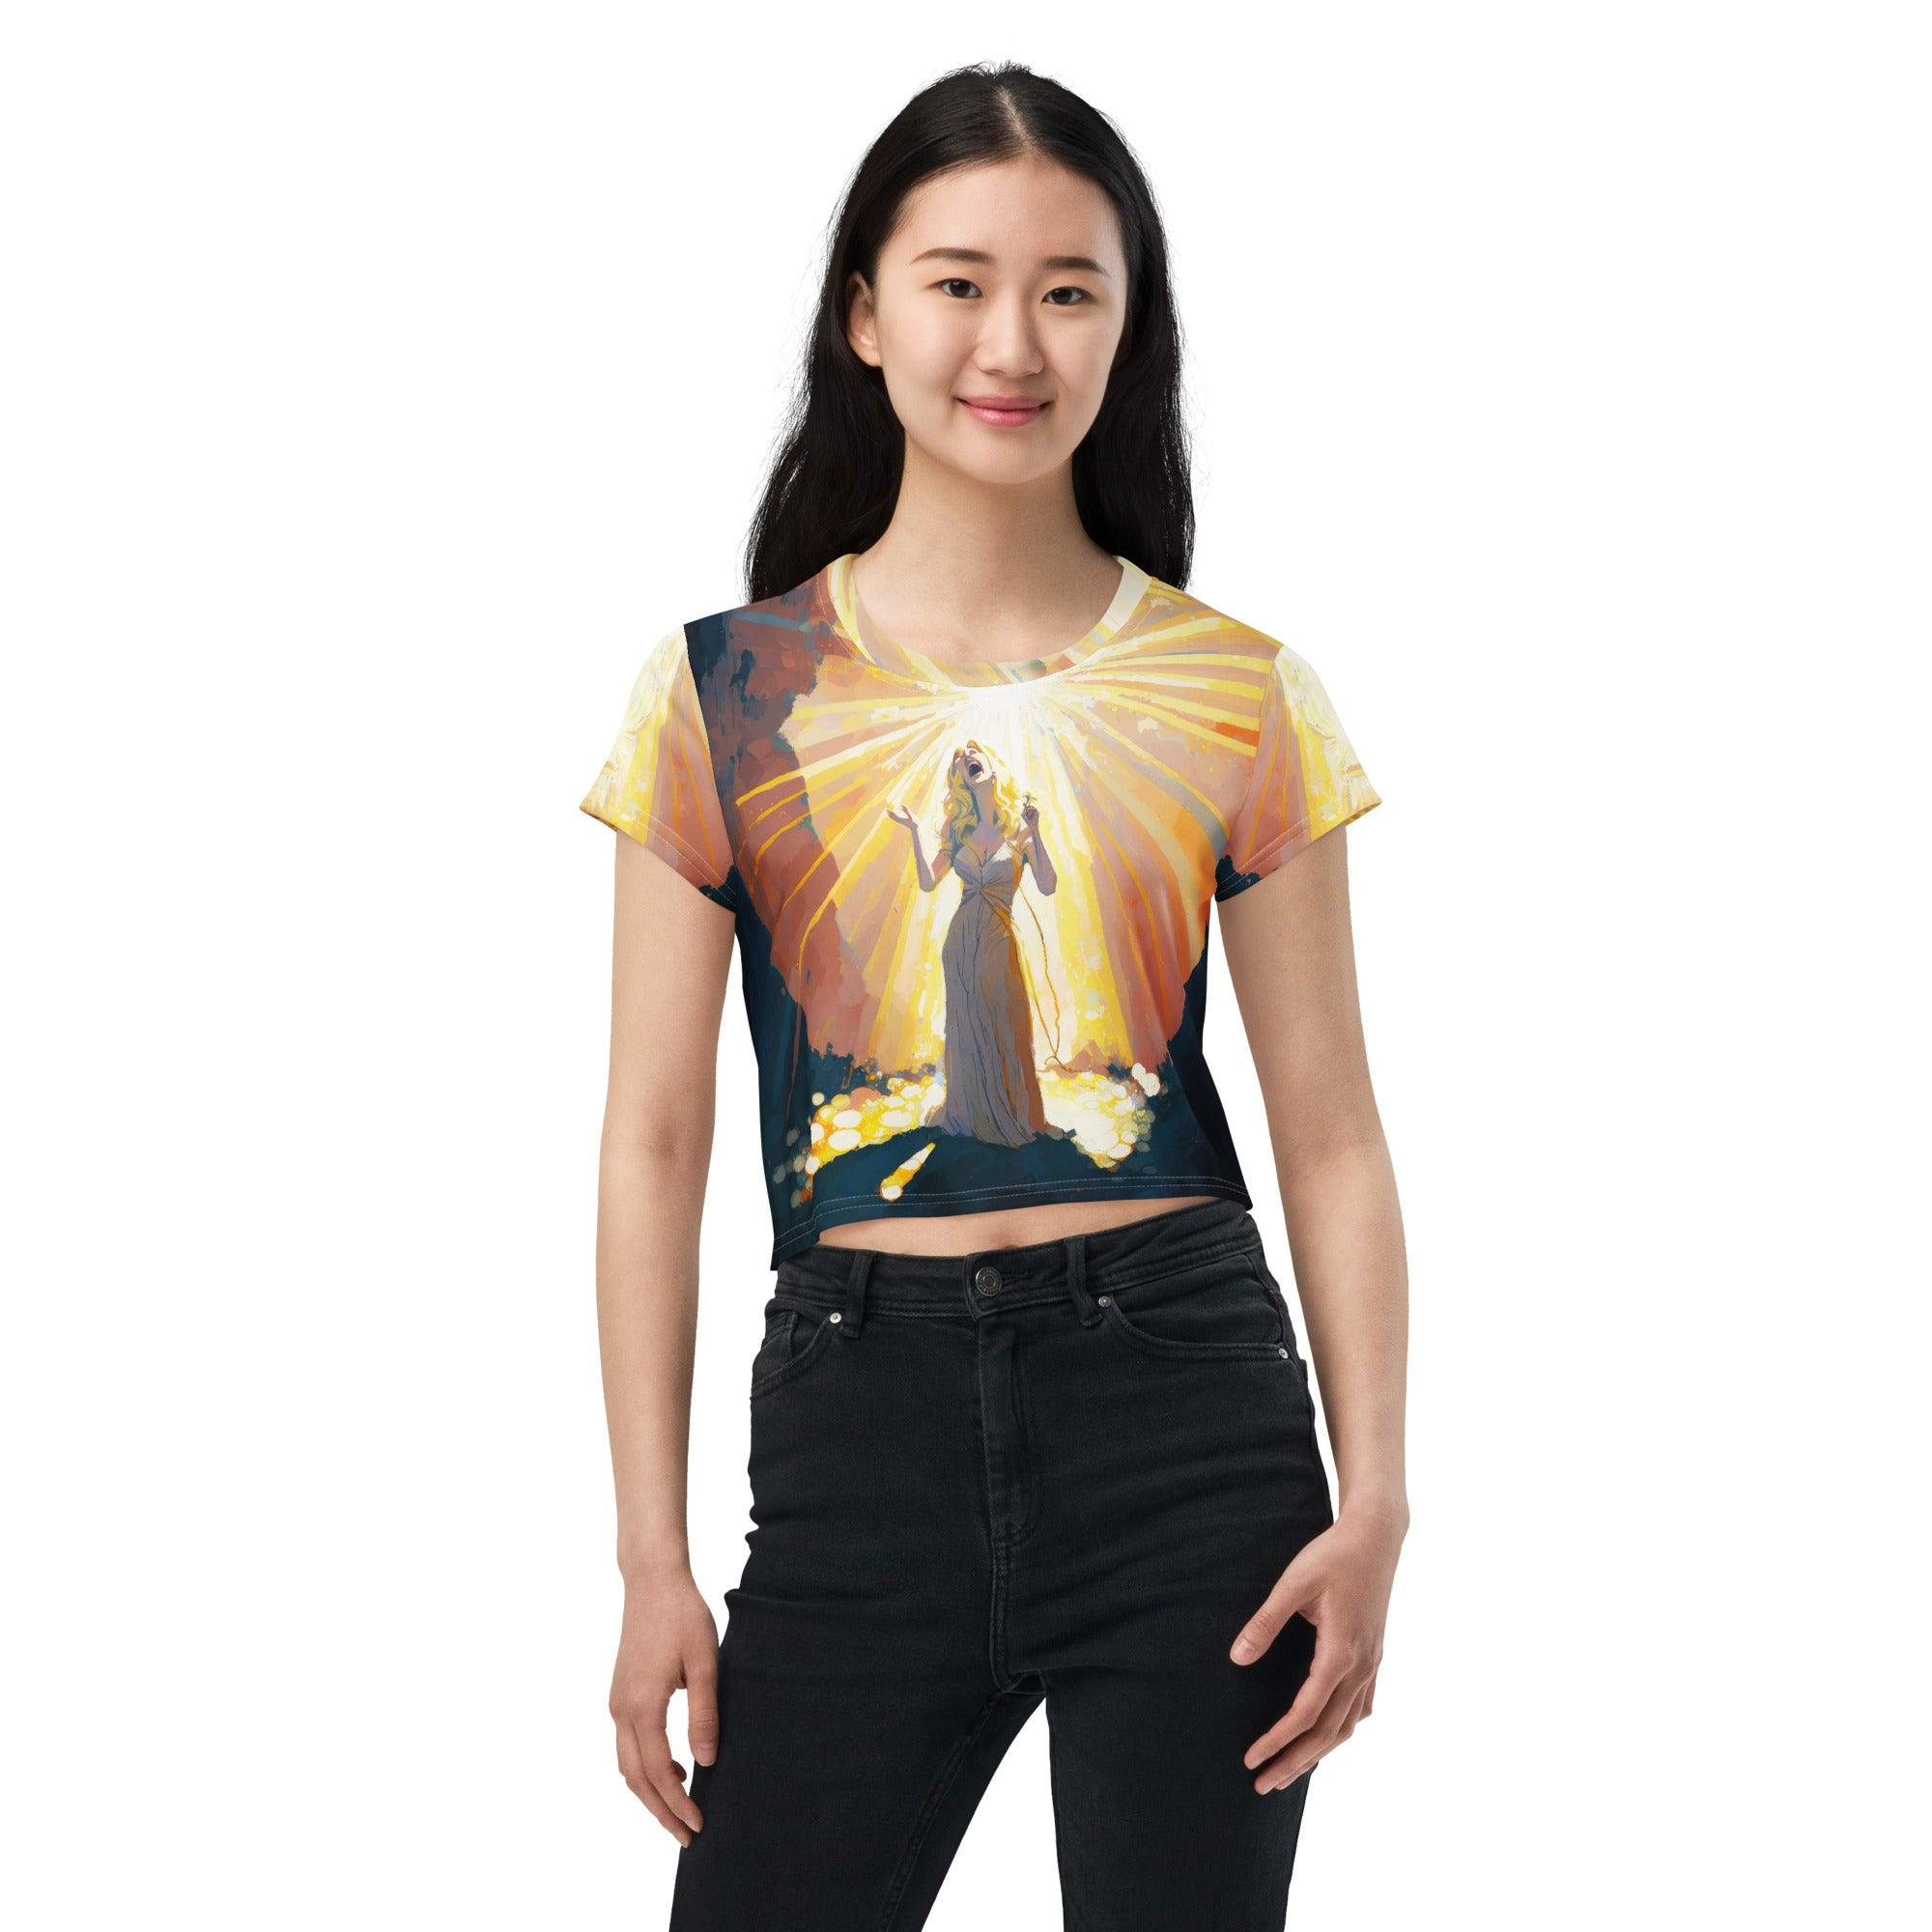 SurArt 71 vibrant all-over print crop tee on model.